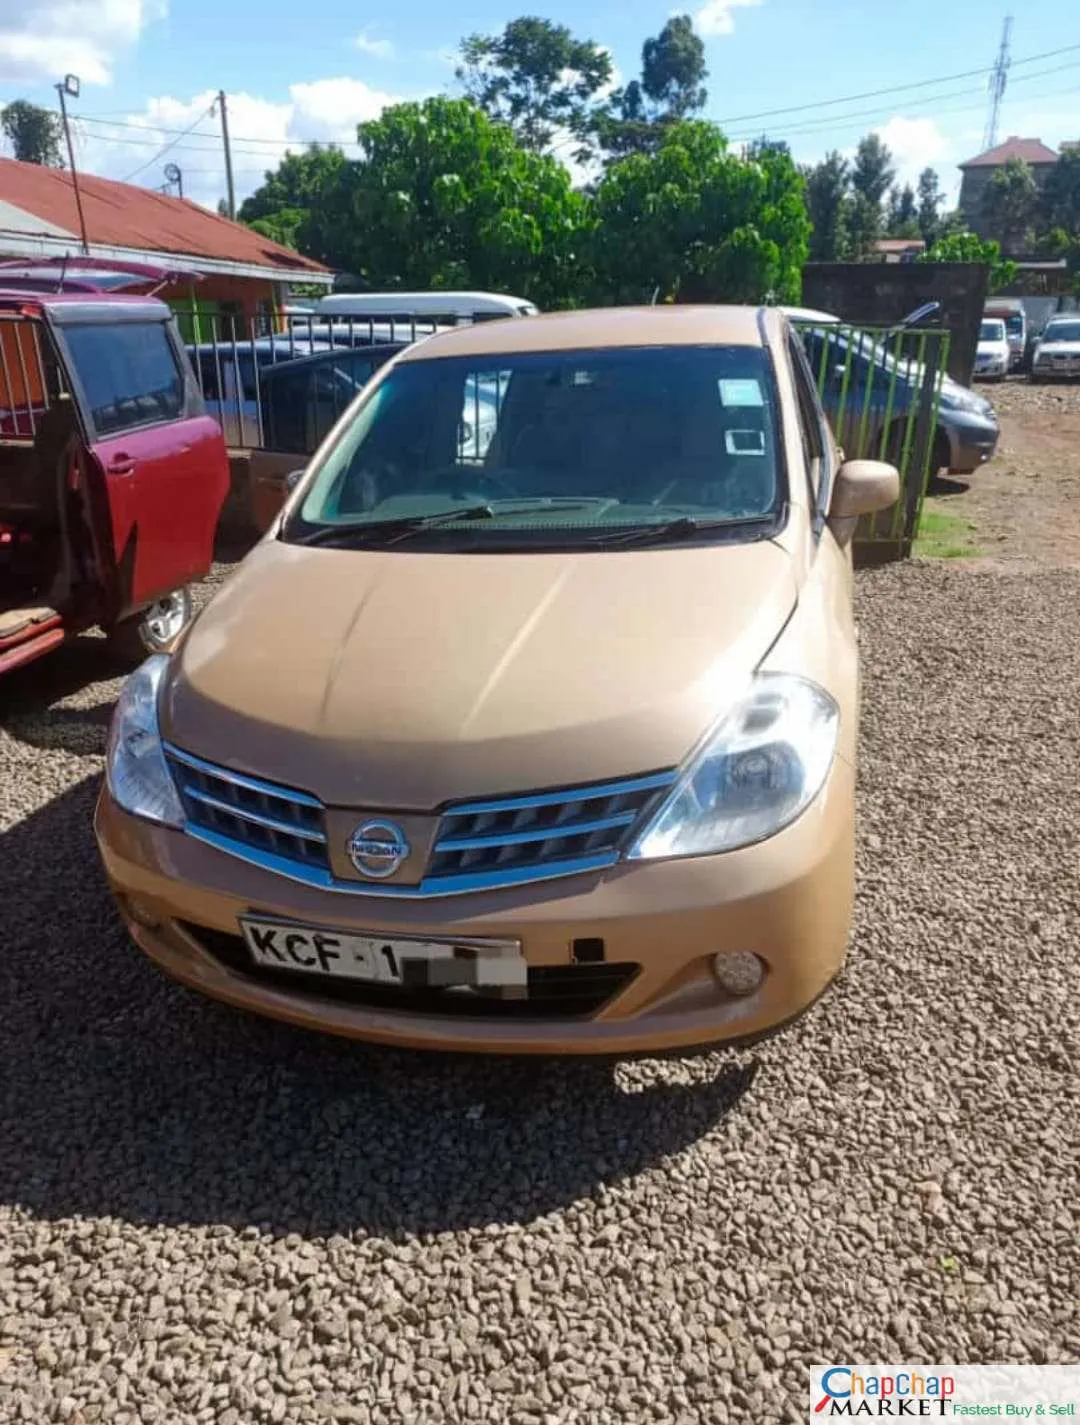 Cars Cars For Sale-Nissan Tiida 330K QUICK SALE You ONLY Pay 20% Deposit Trade in Ok Wow! 4